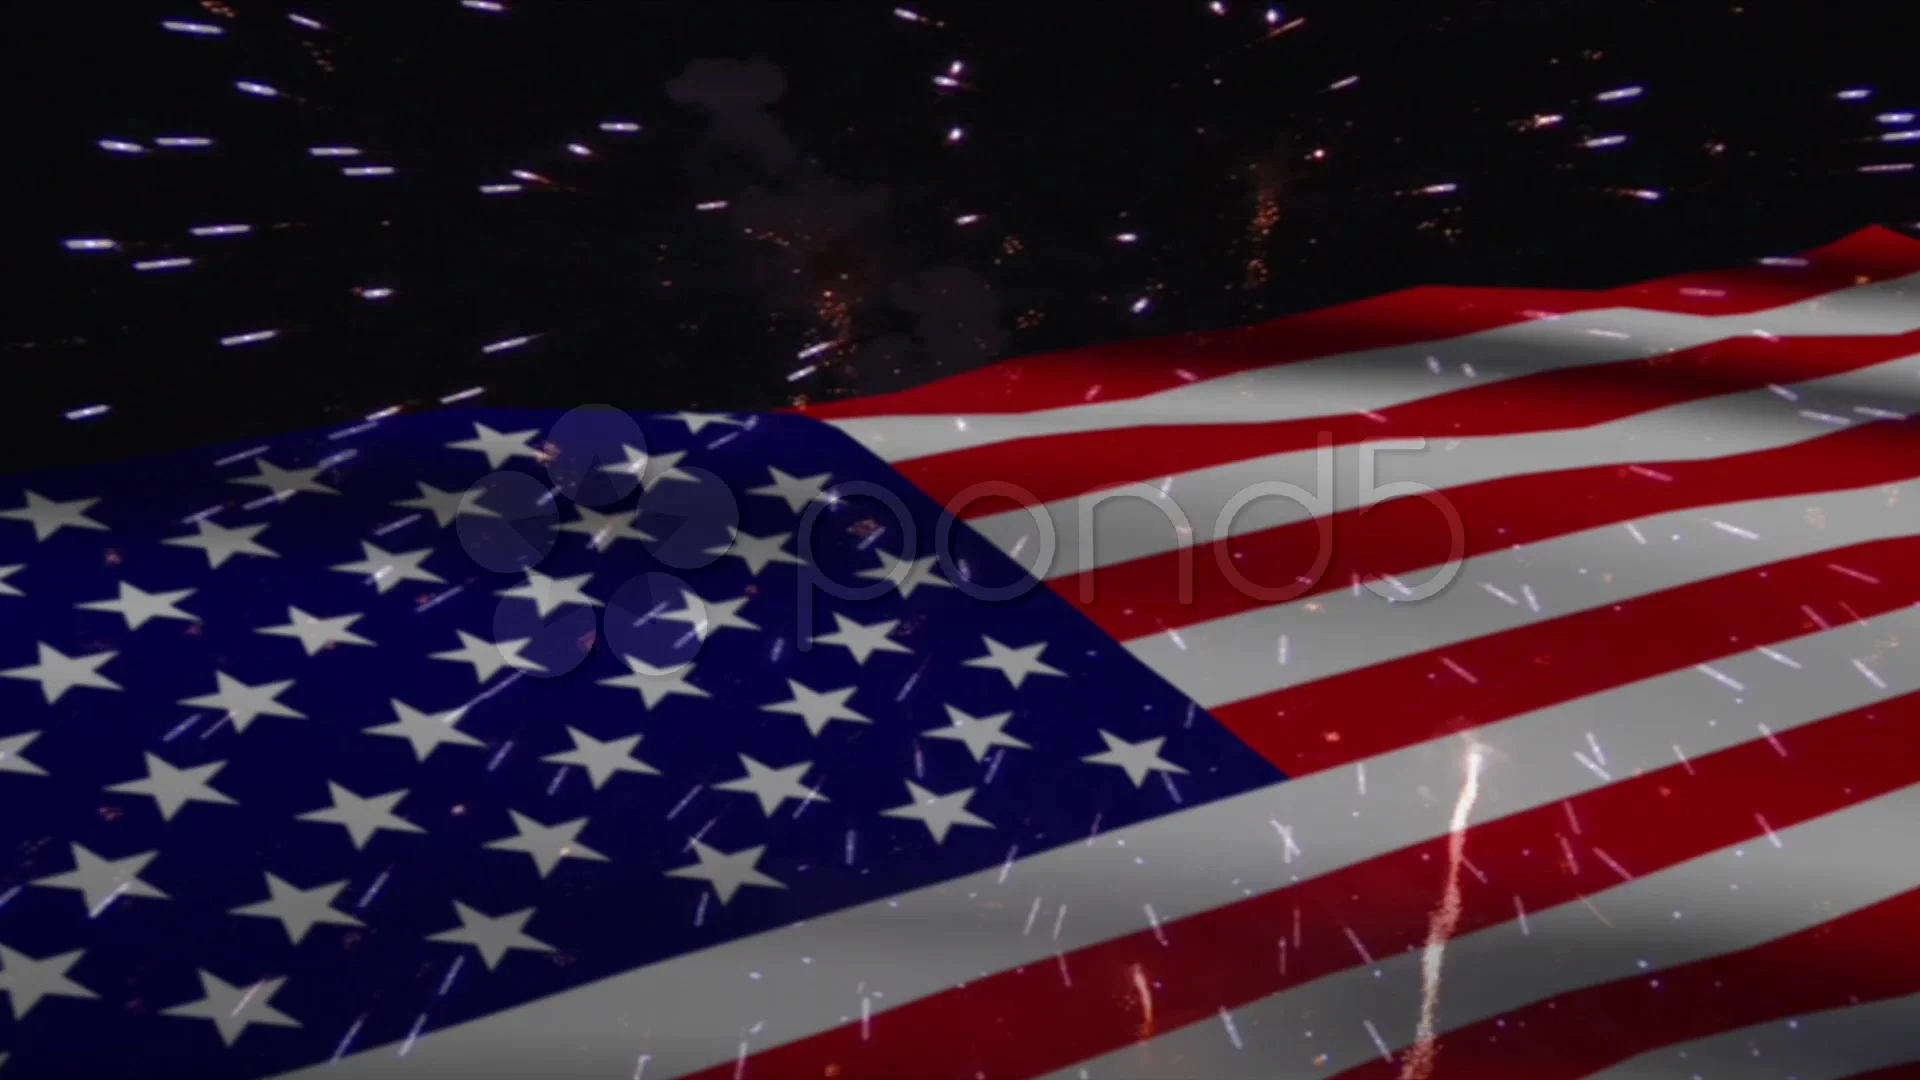 fireworks with american flag